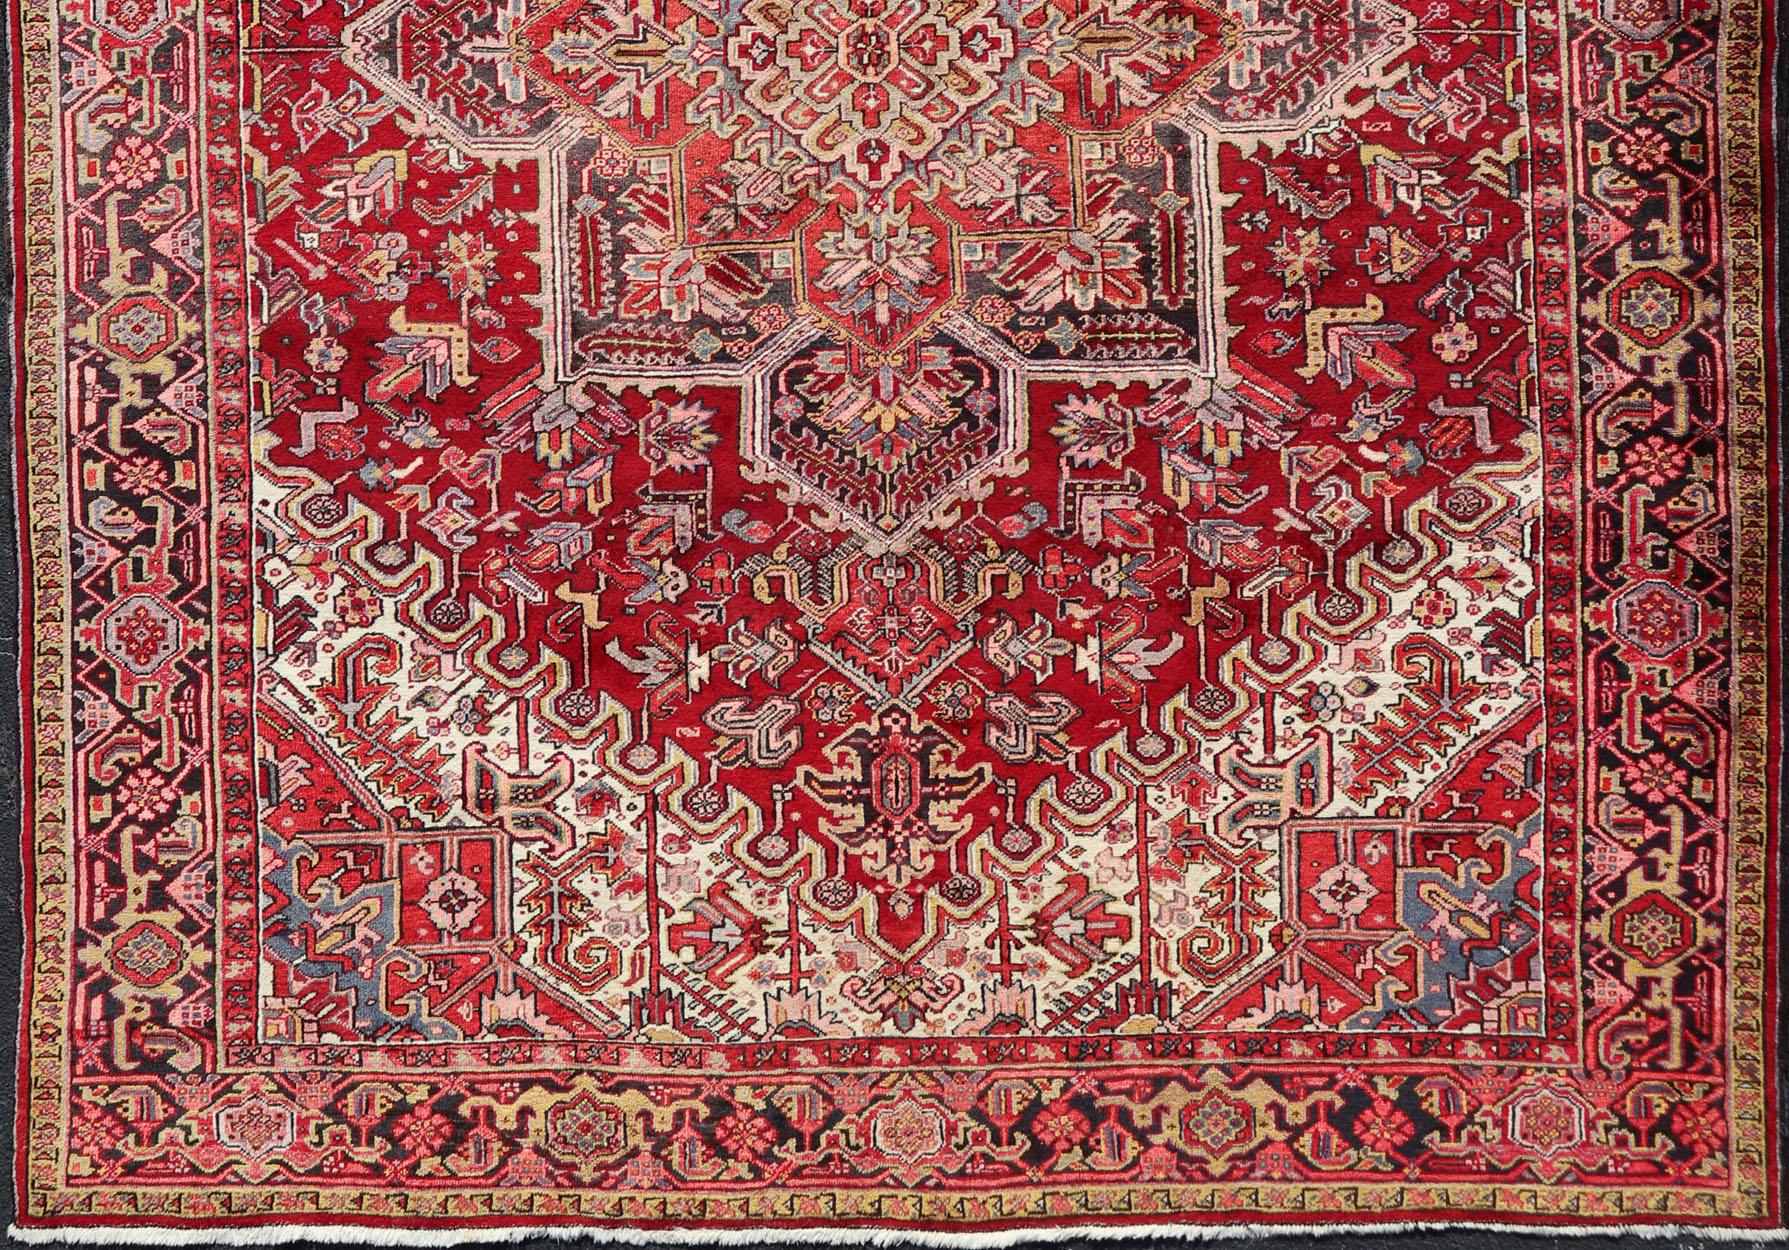 Vintage Persian Heriz rug, rug PTA-21023, country of origin / type: Persian / Heriz, circa Mid-20th Century.

This Vintage Heriz rug, hailing from northwestern Iran (circa 1950's), features a central medallion design surrounded by exquisitely